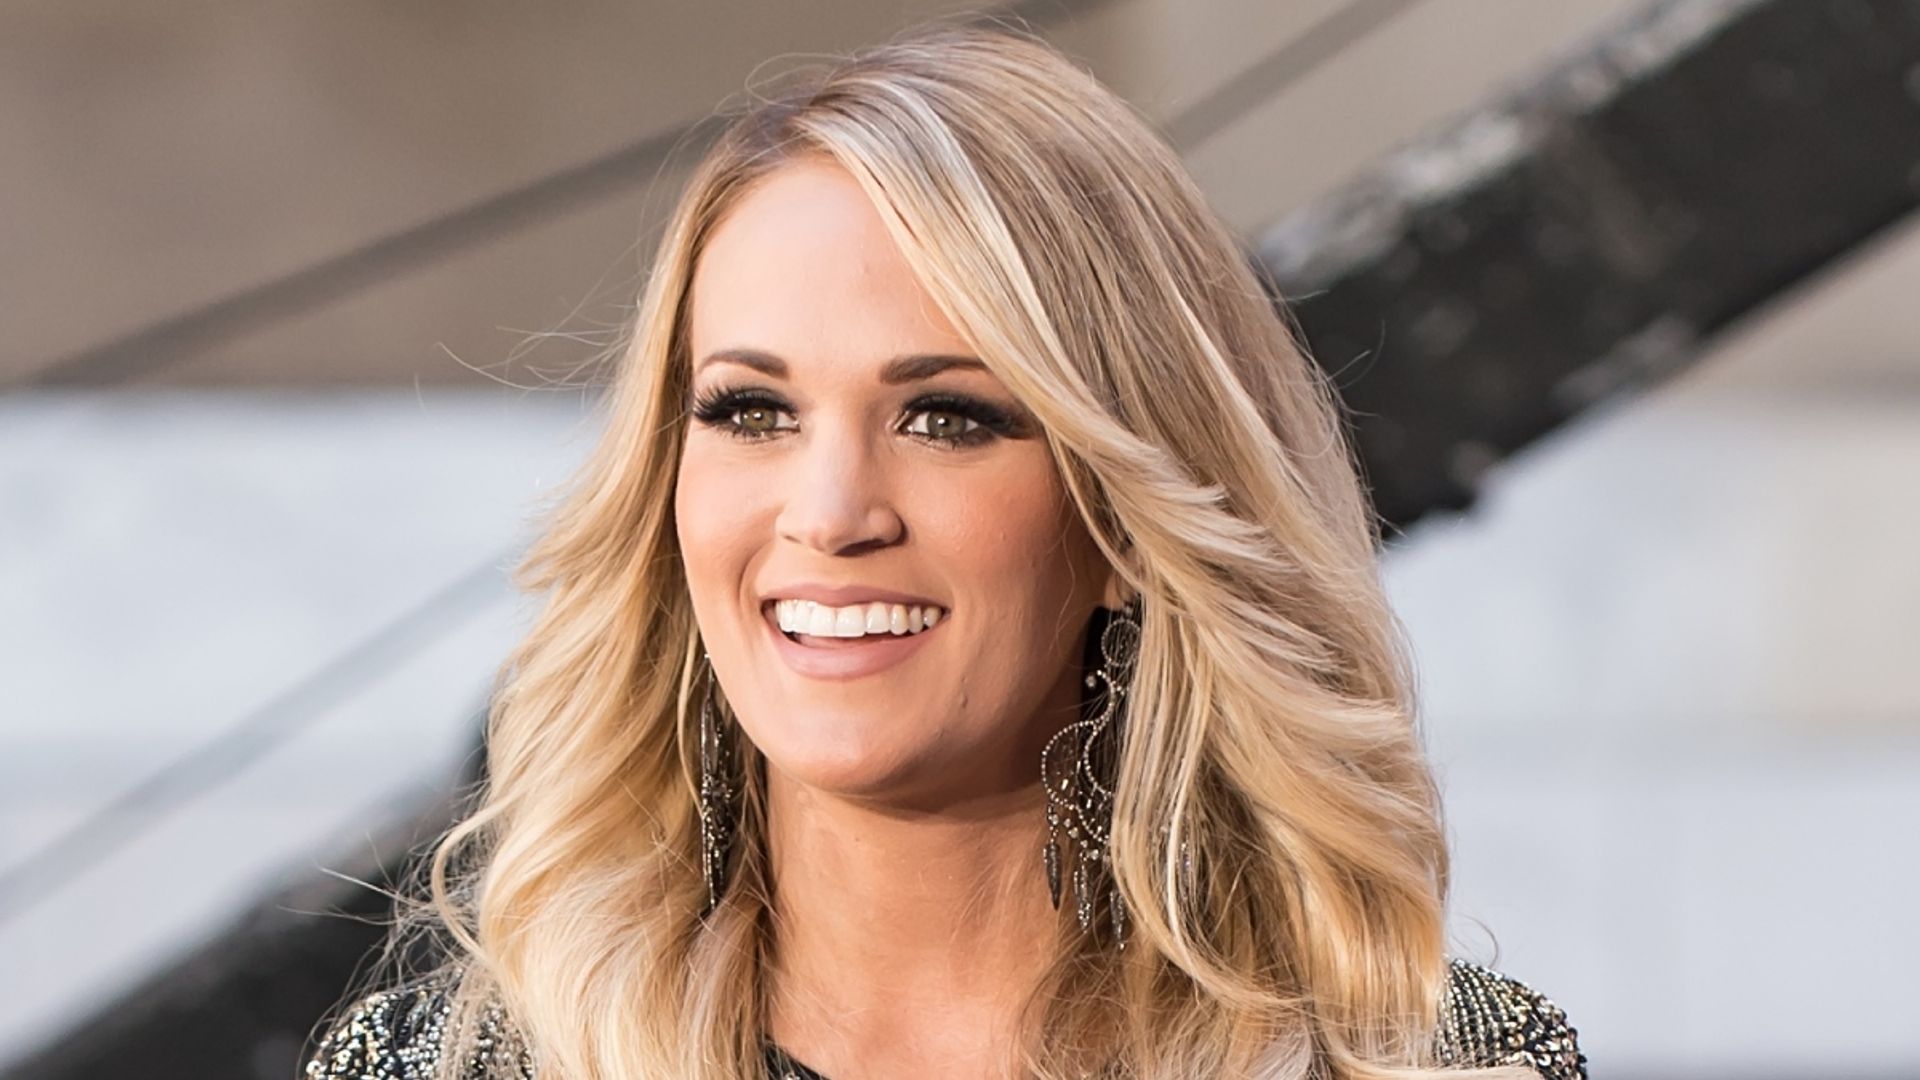 Carrie Underwood shares love letters written by her sons for 40th birthday